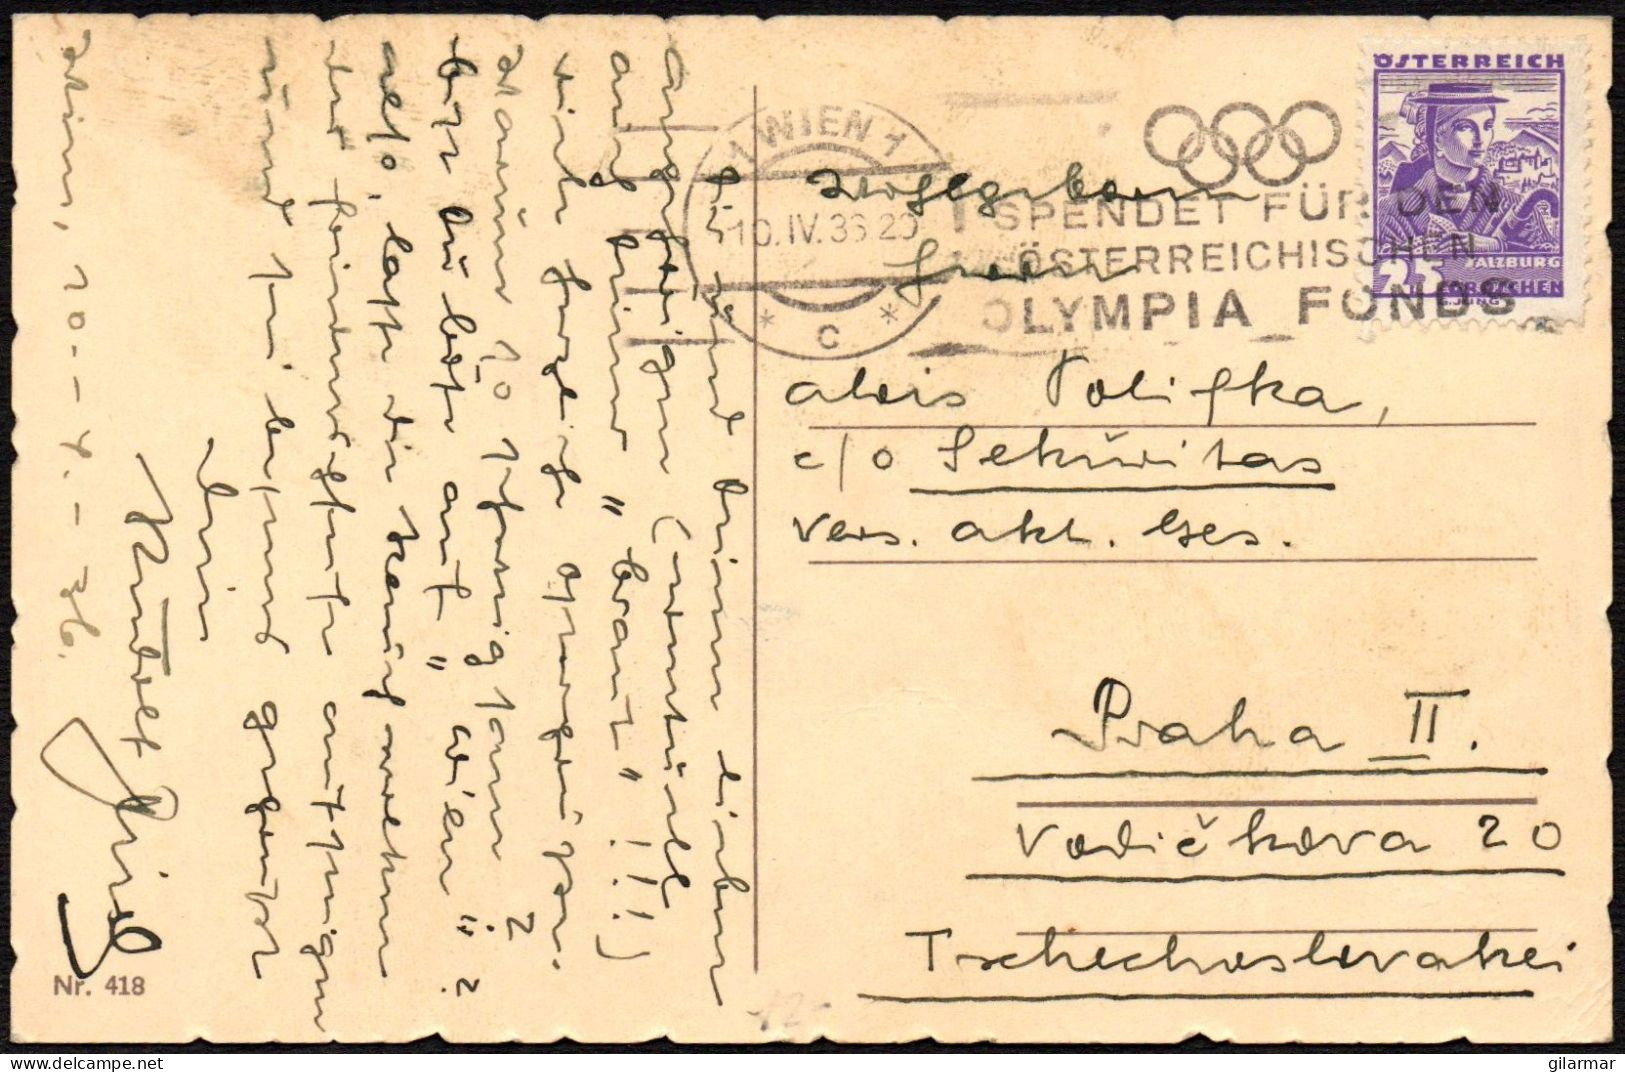 OLYMPIC GAMES 1936 - AUSTRIA WIEN 1 C 1935 - DONATE TO THE AUSTRIAN OLYMPIC FUND - MAILED POSTCARD - M - Estate 1936: Berlino